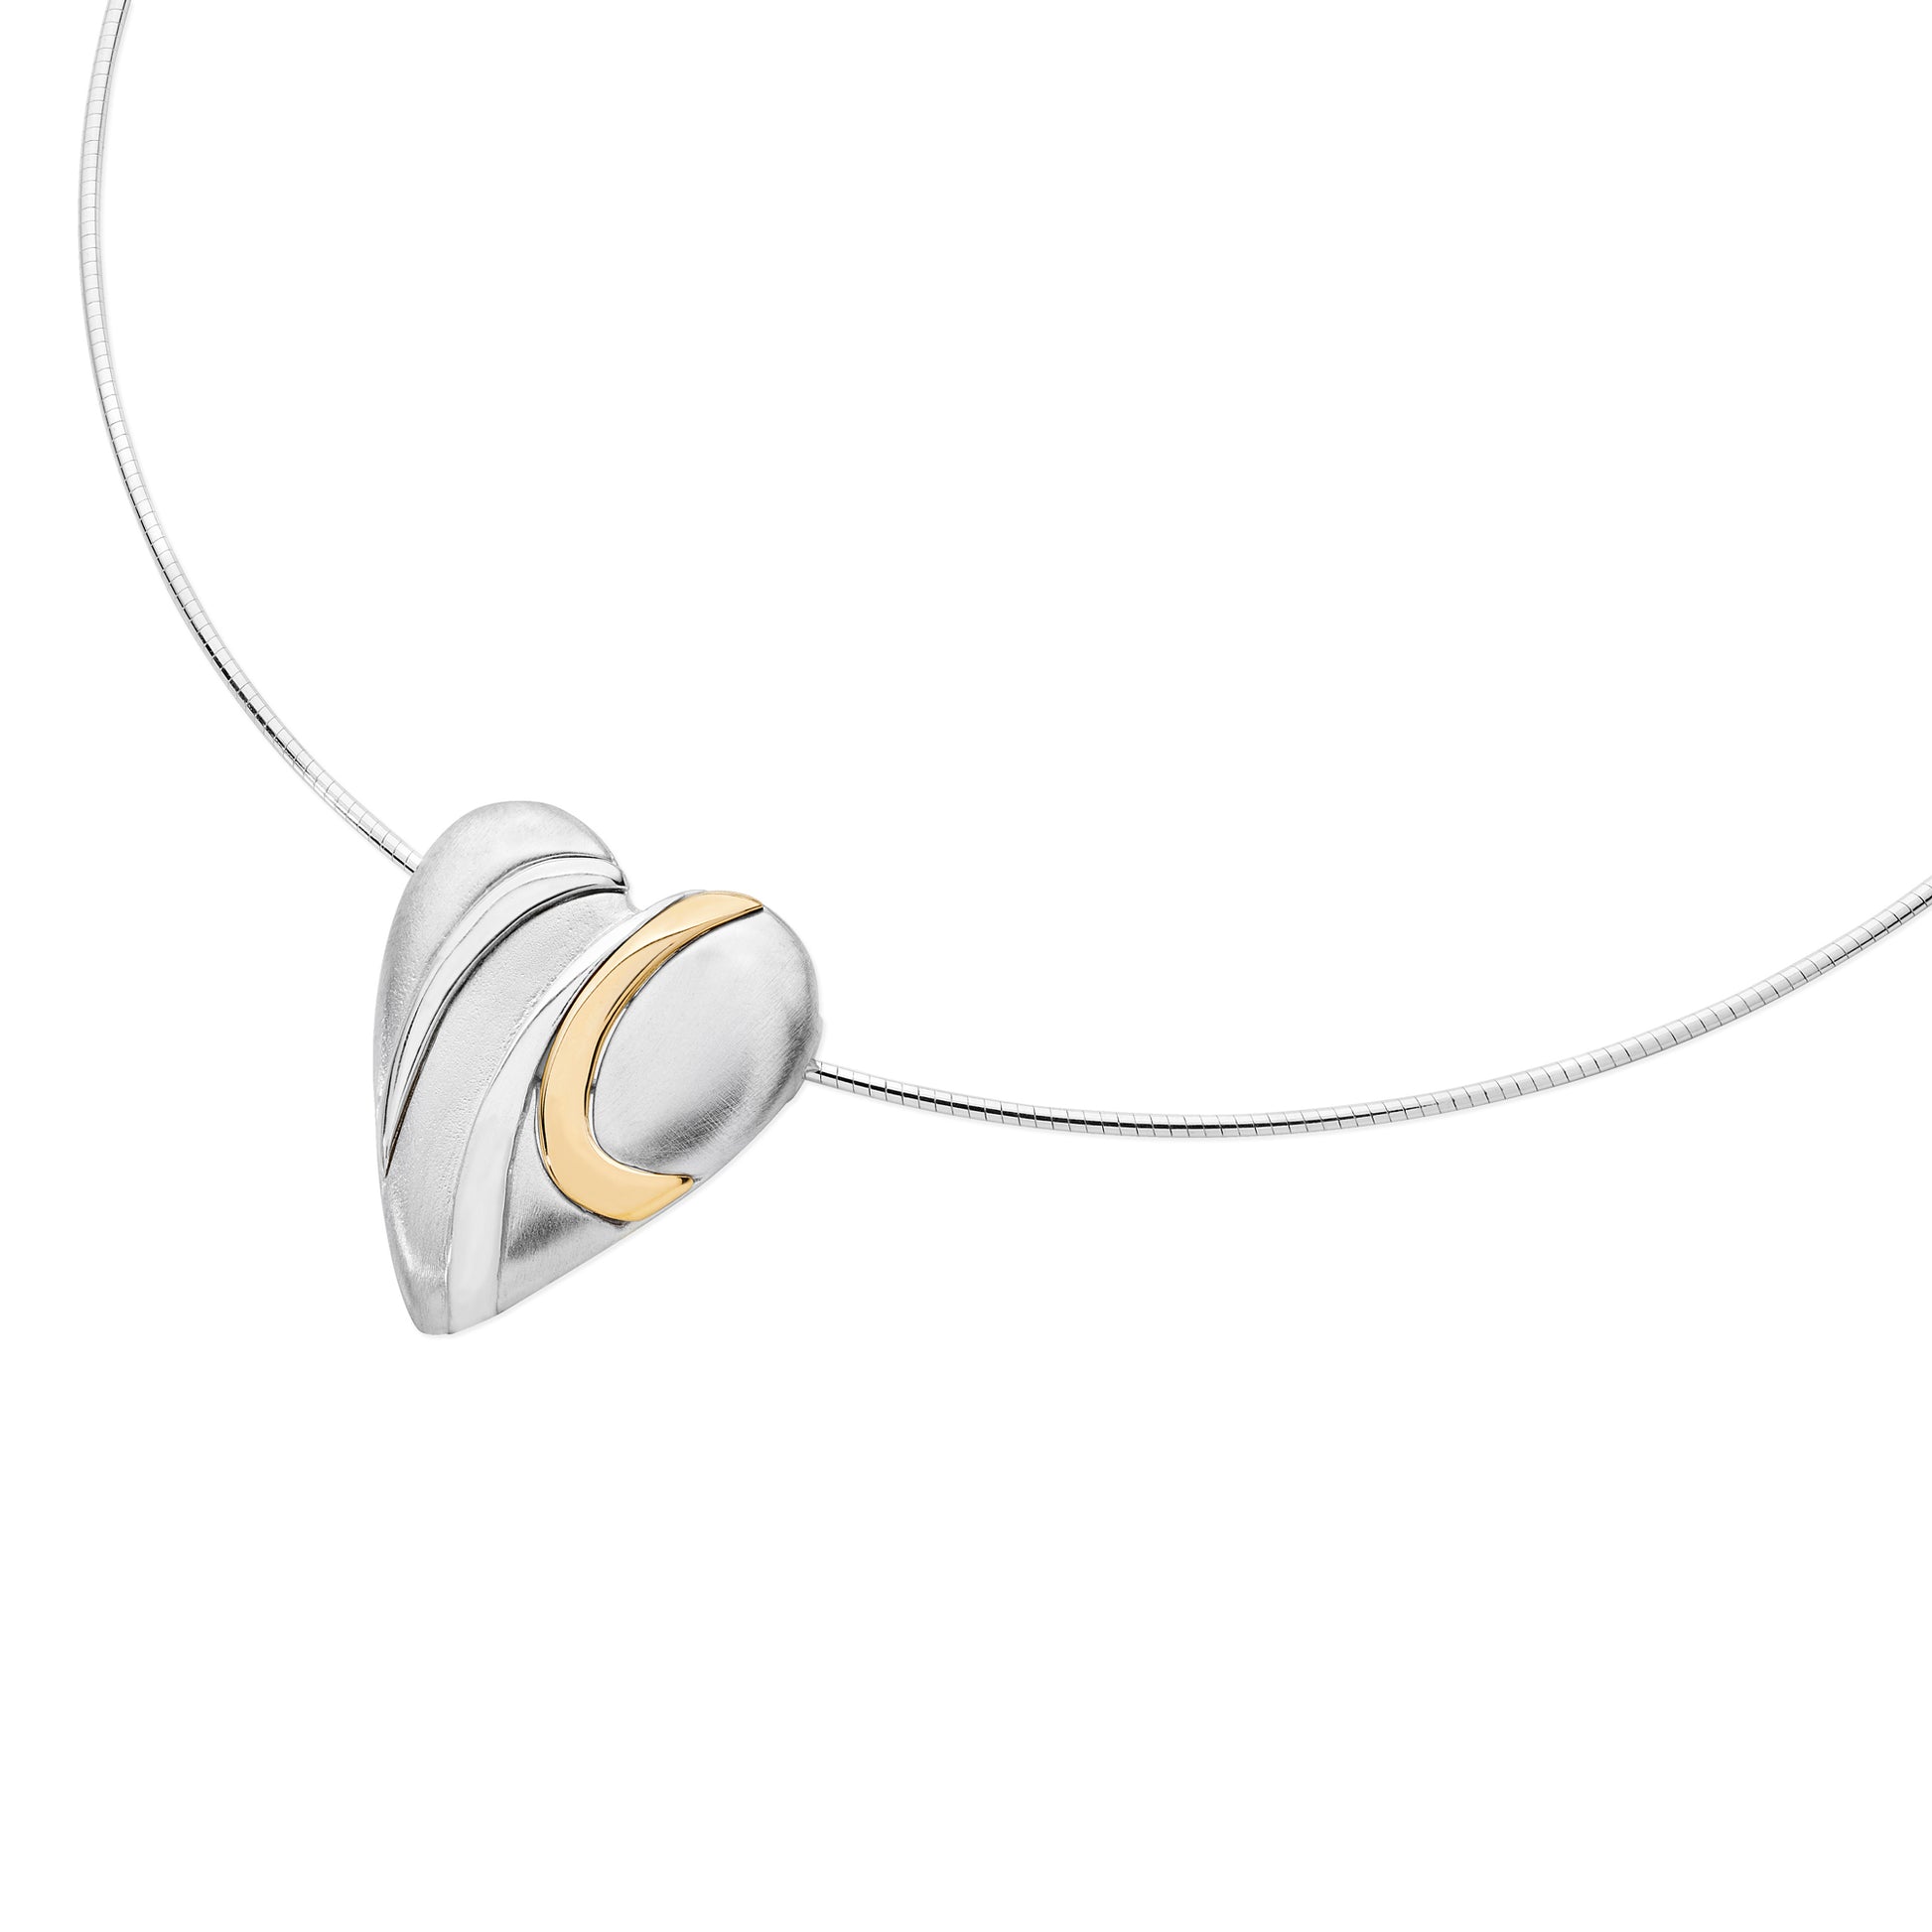 Pebble Heart Neckwire, in Silver with Gold Detail, by Aurora Orkney Jewellery, Orkney, Scotland